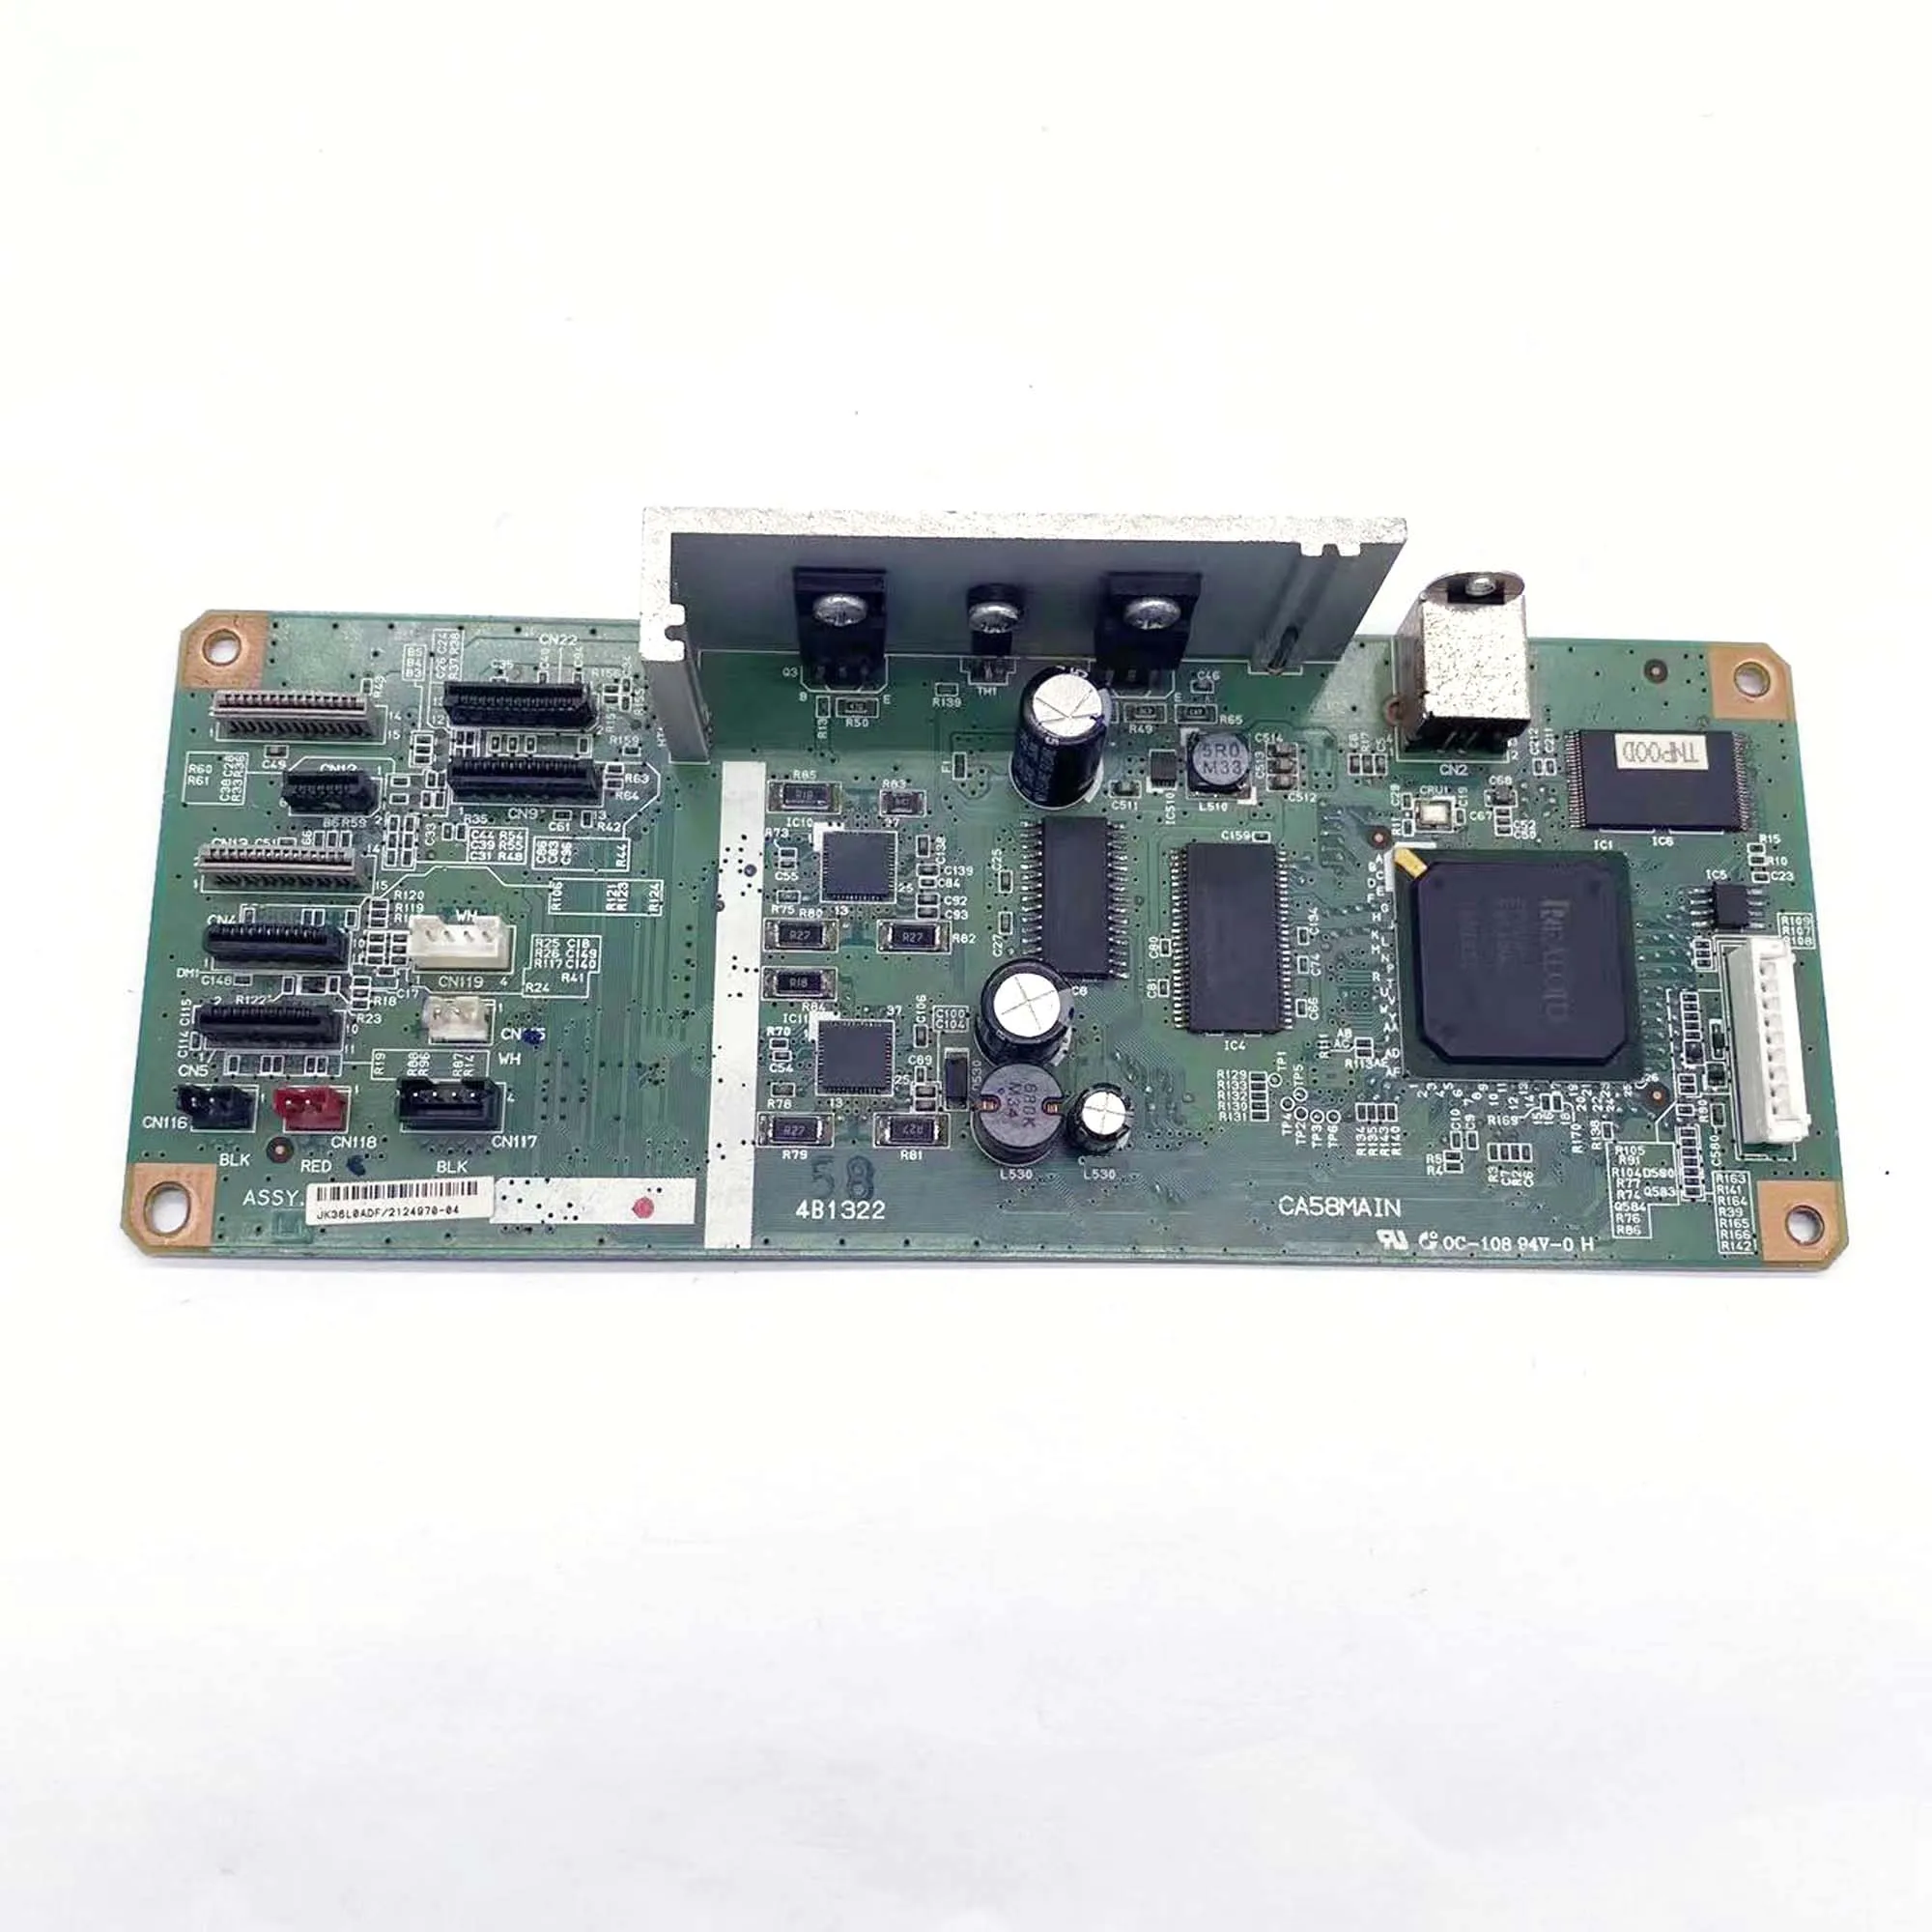 

PCA ASSY Formatter Logic Main Board Motherboard Fits For Epson Office ME1100